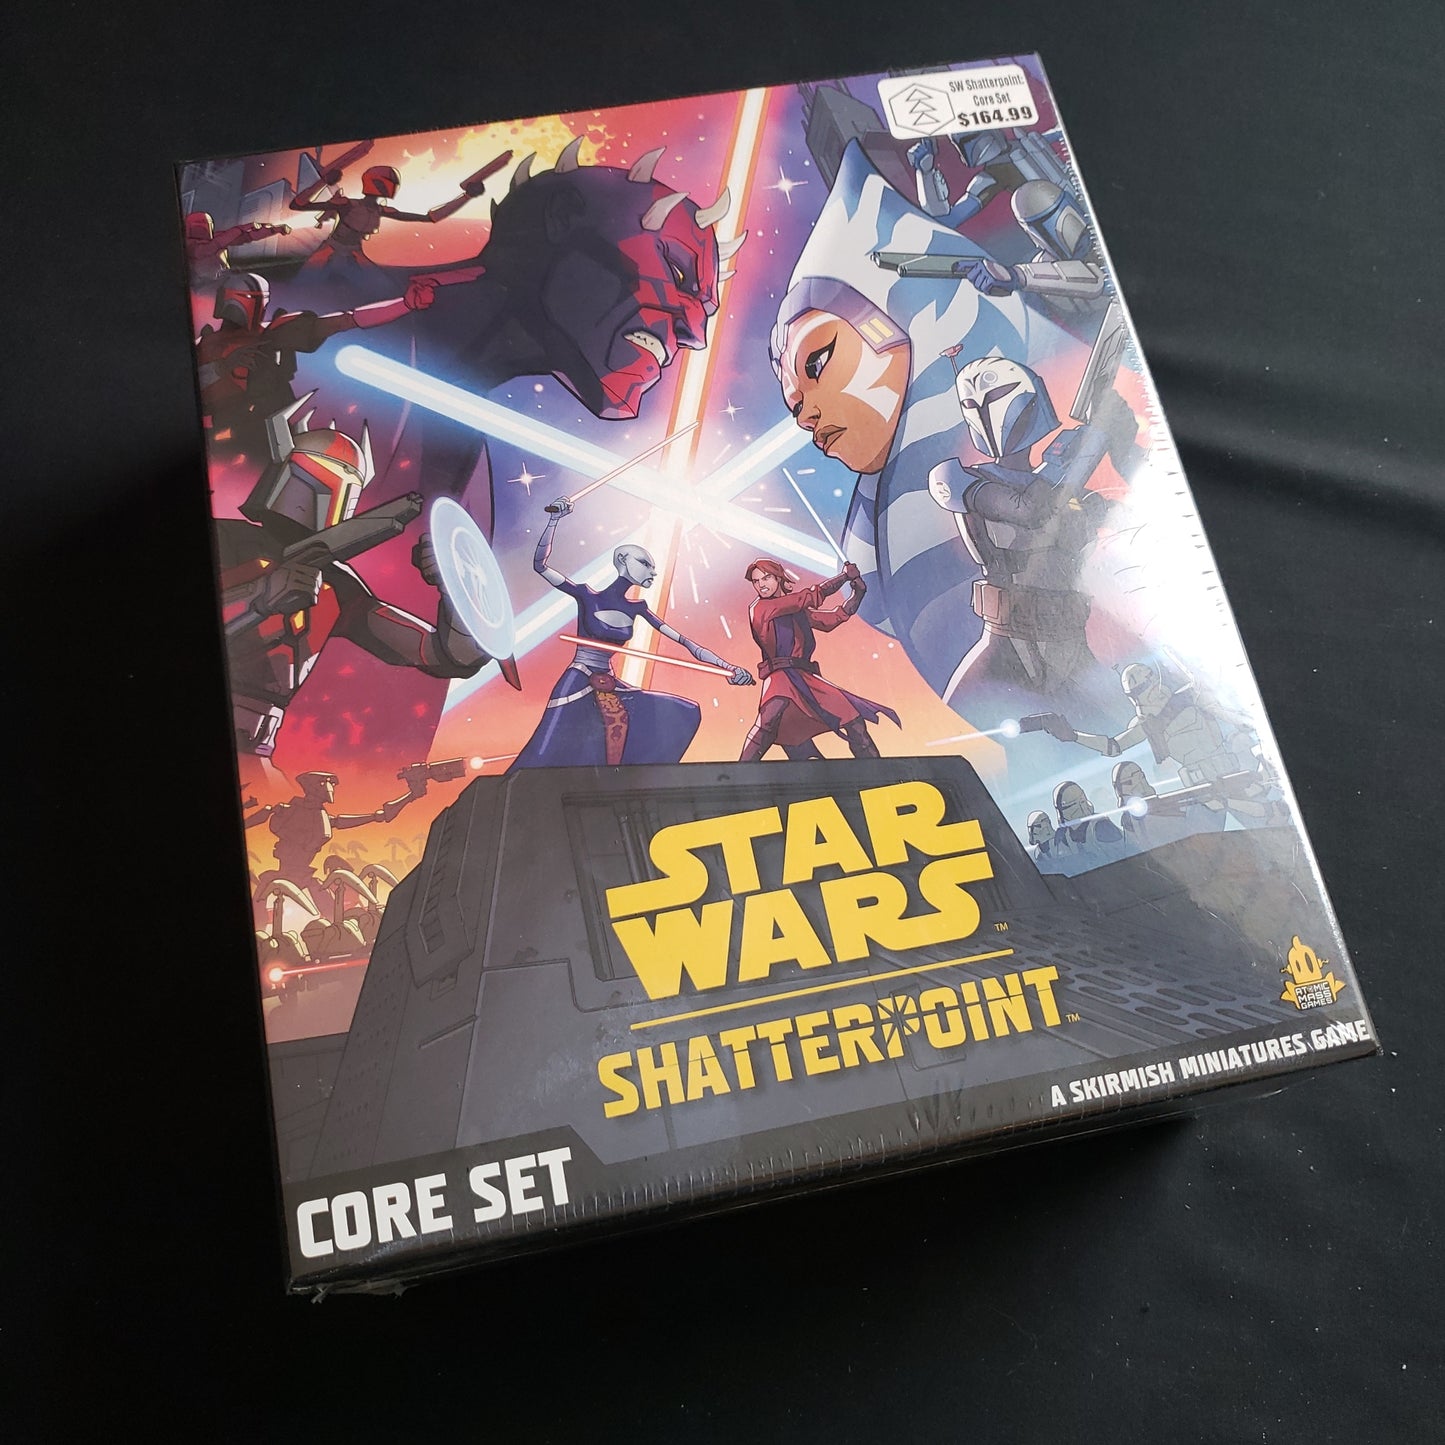 Image shows the front cover of the Core Set box for the Star Wars Shatterpoint miniatures game